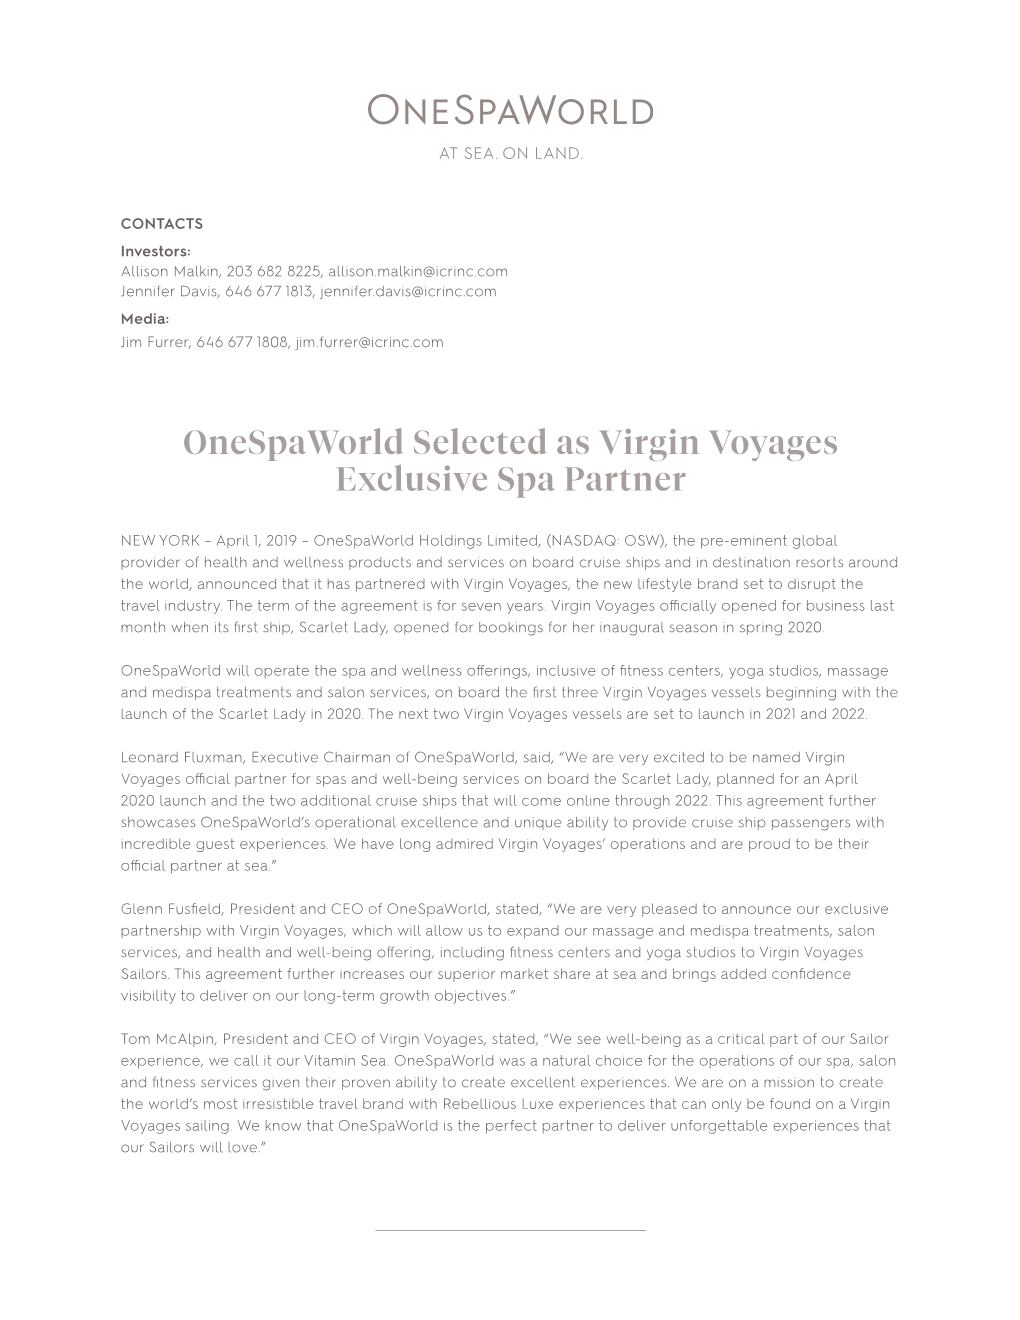 Onespaworld Selected As Virgin Voyages Exclusive Spa Partner